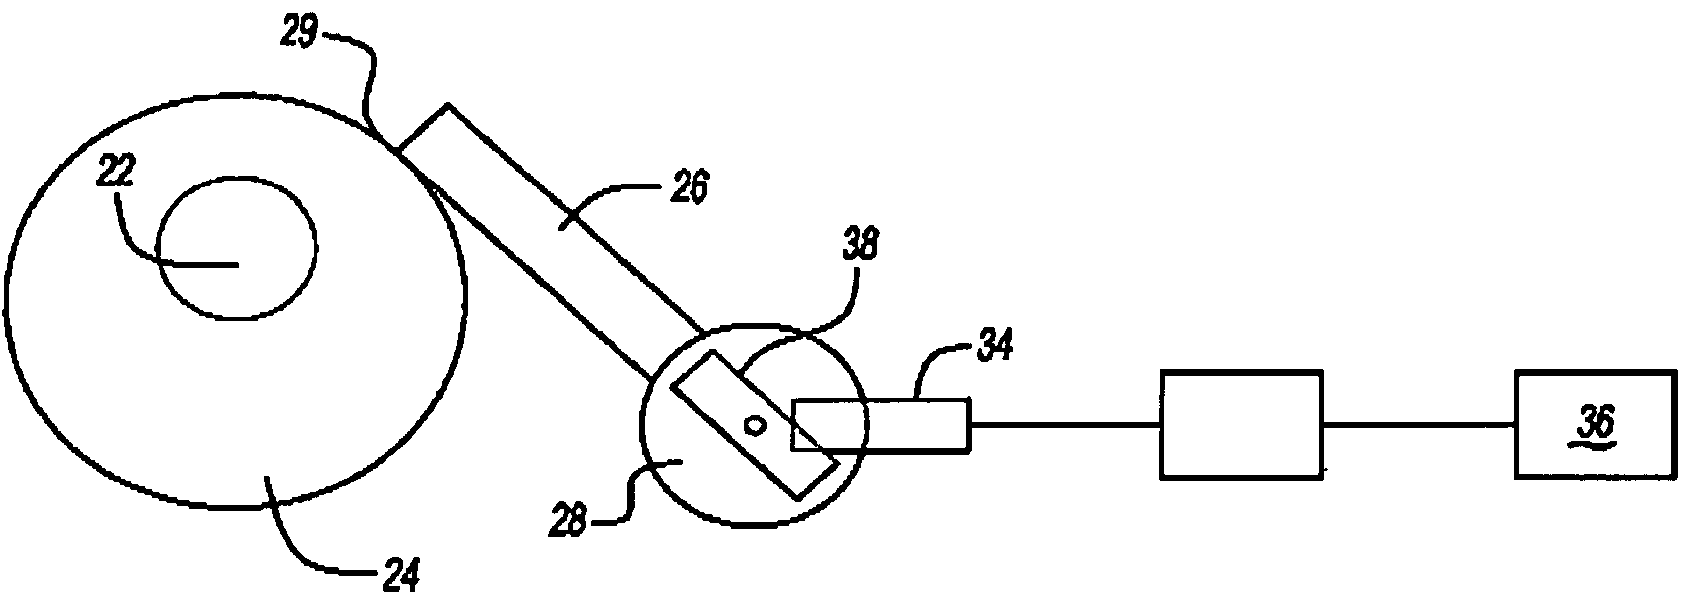 Non-contacting large angle rotary position sensor for rotating shaft